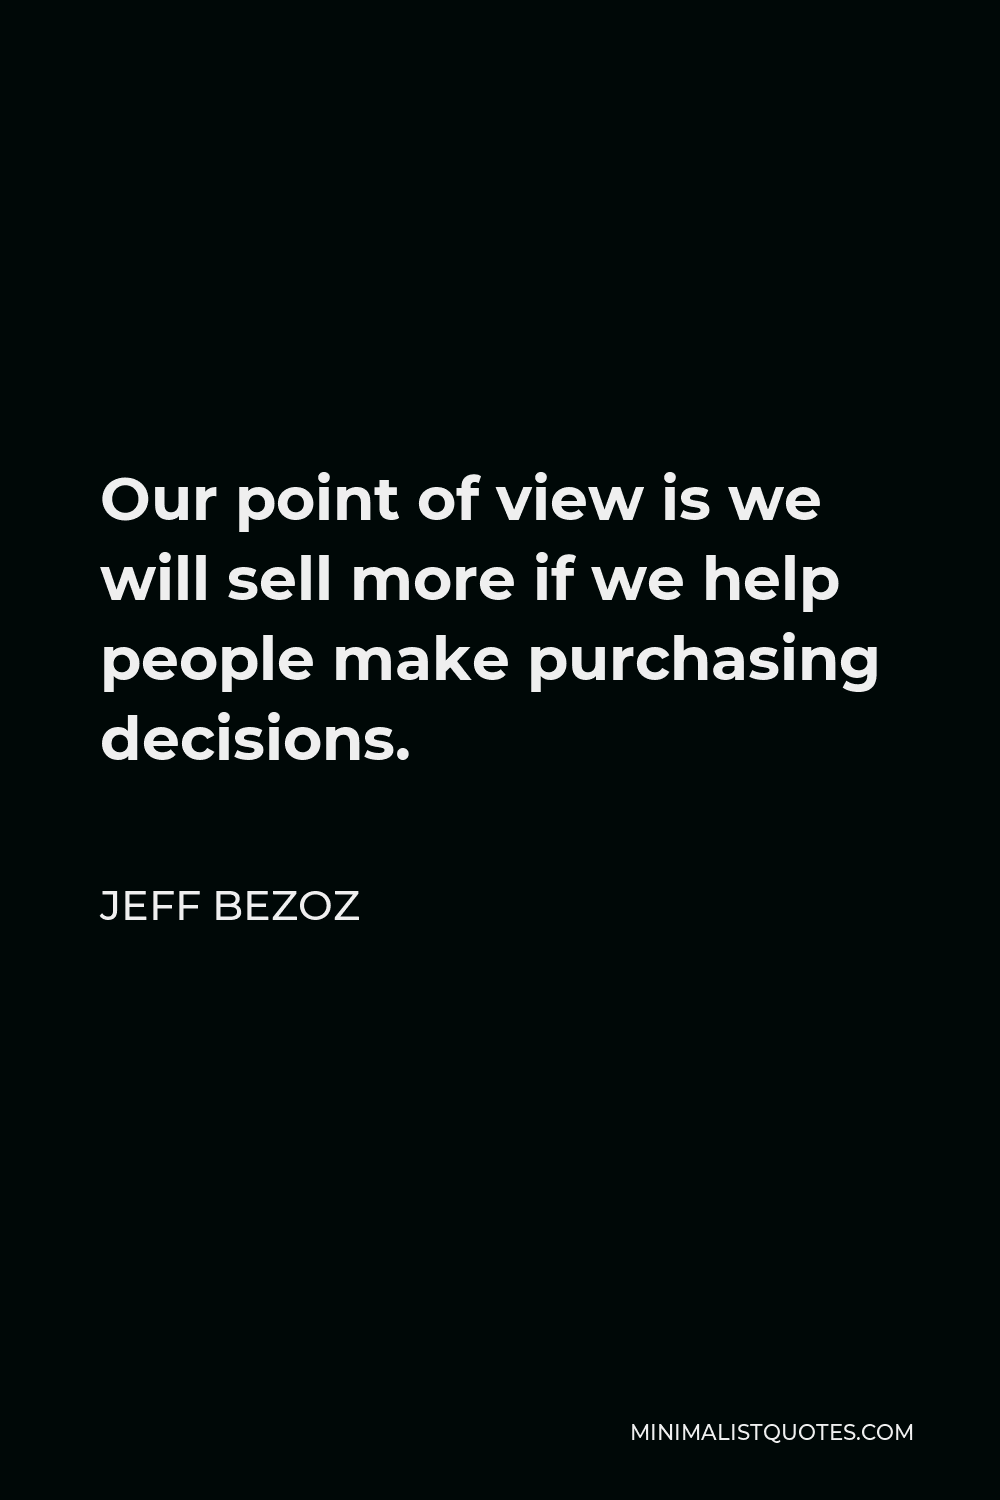 Jeff Bezoz Quote - Our point of view is we will sell more if we help people make purchasing decisions.